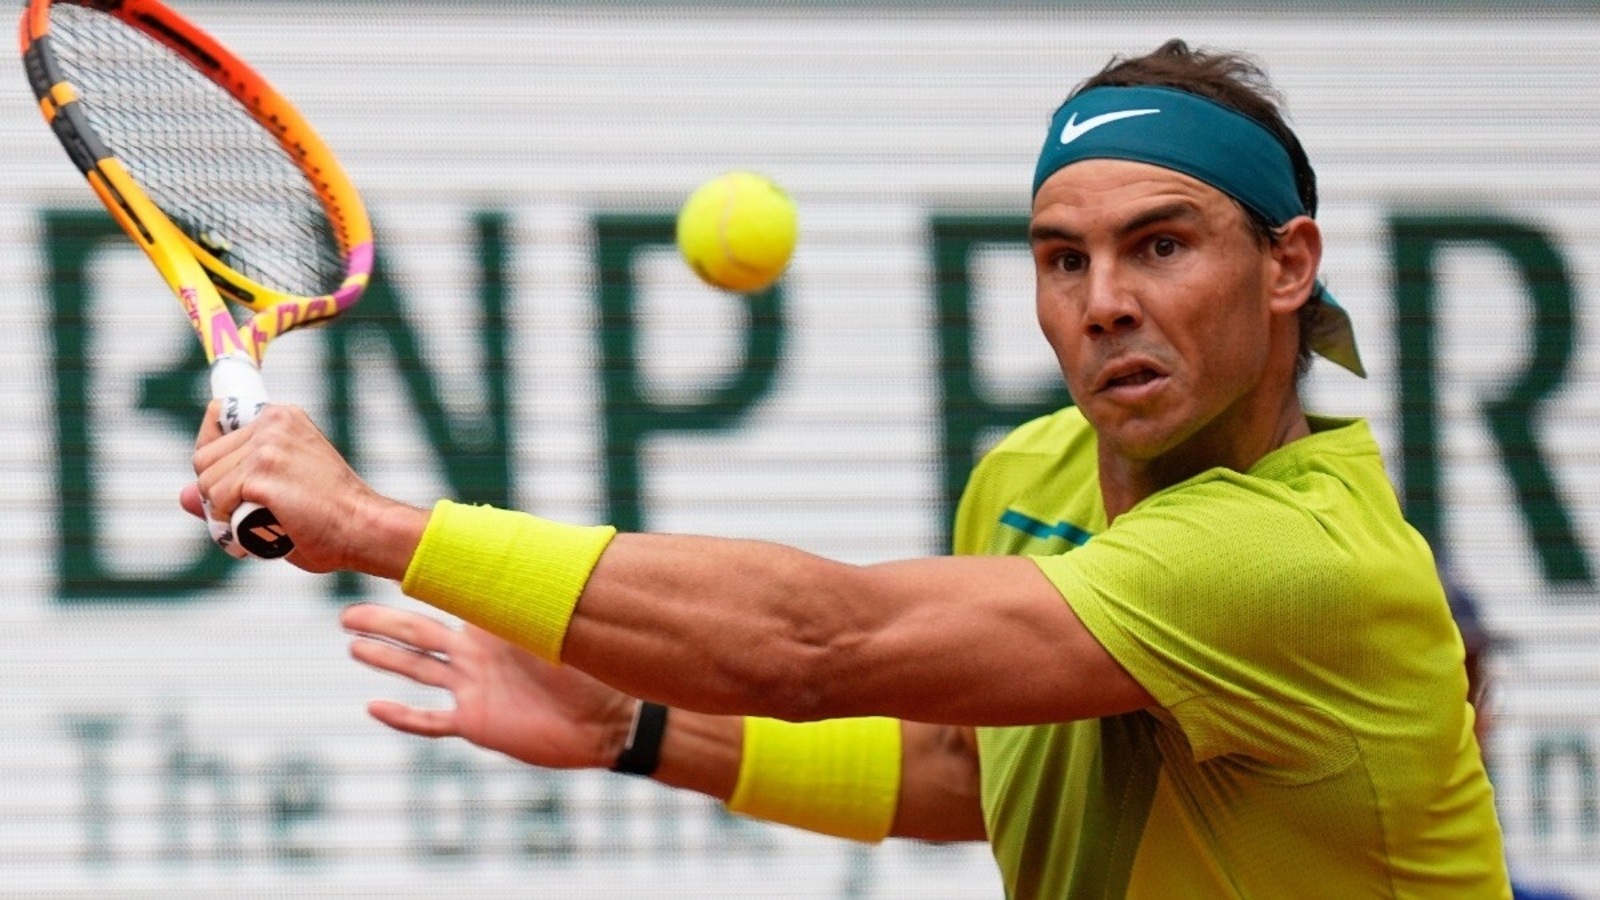 French Open: Rafael Nadal extends dominance at Roland Garros; beats Casper Ruud to win 14th title